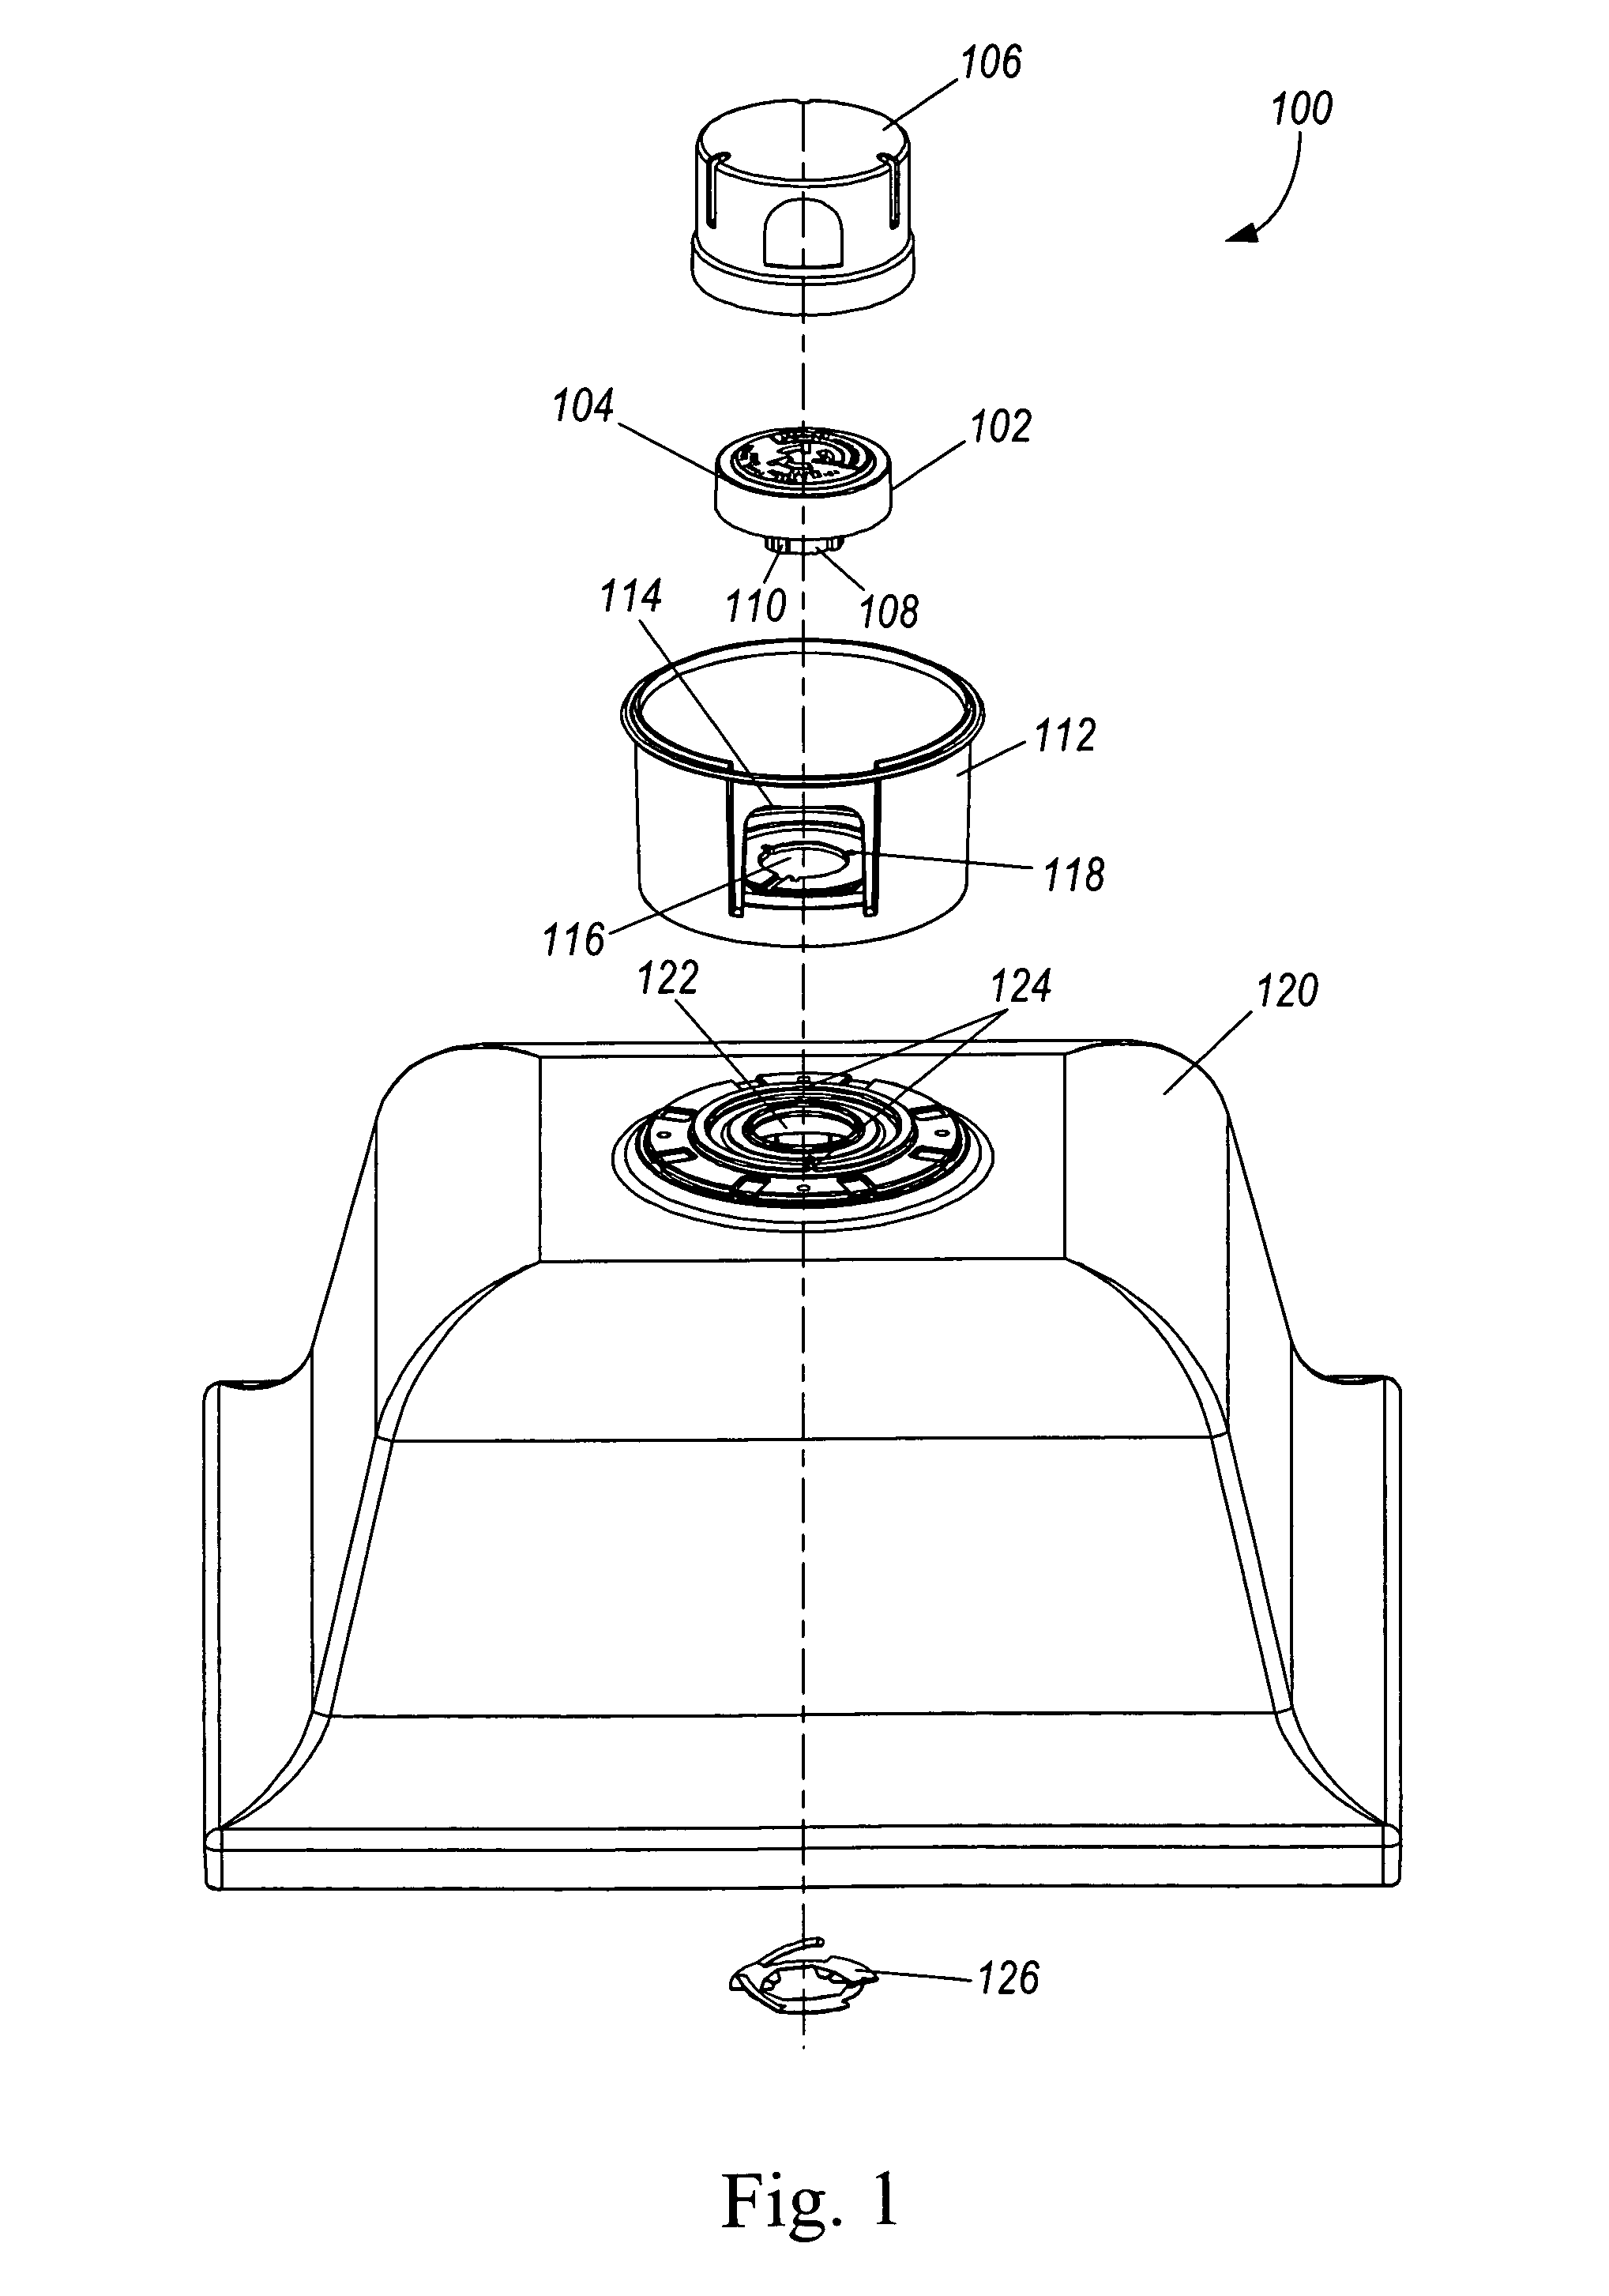 Toolessly adjustable cupola and photocontrol receptacle assembly